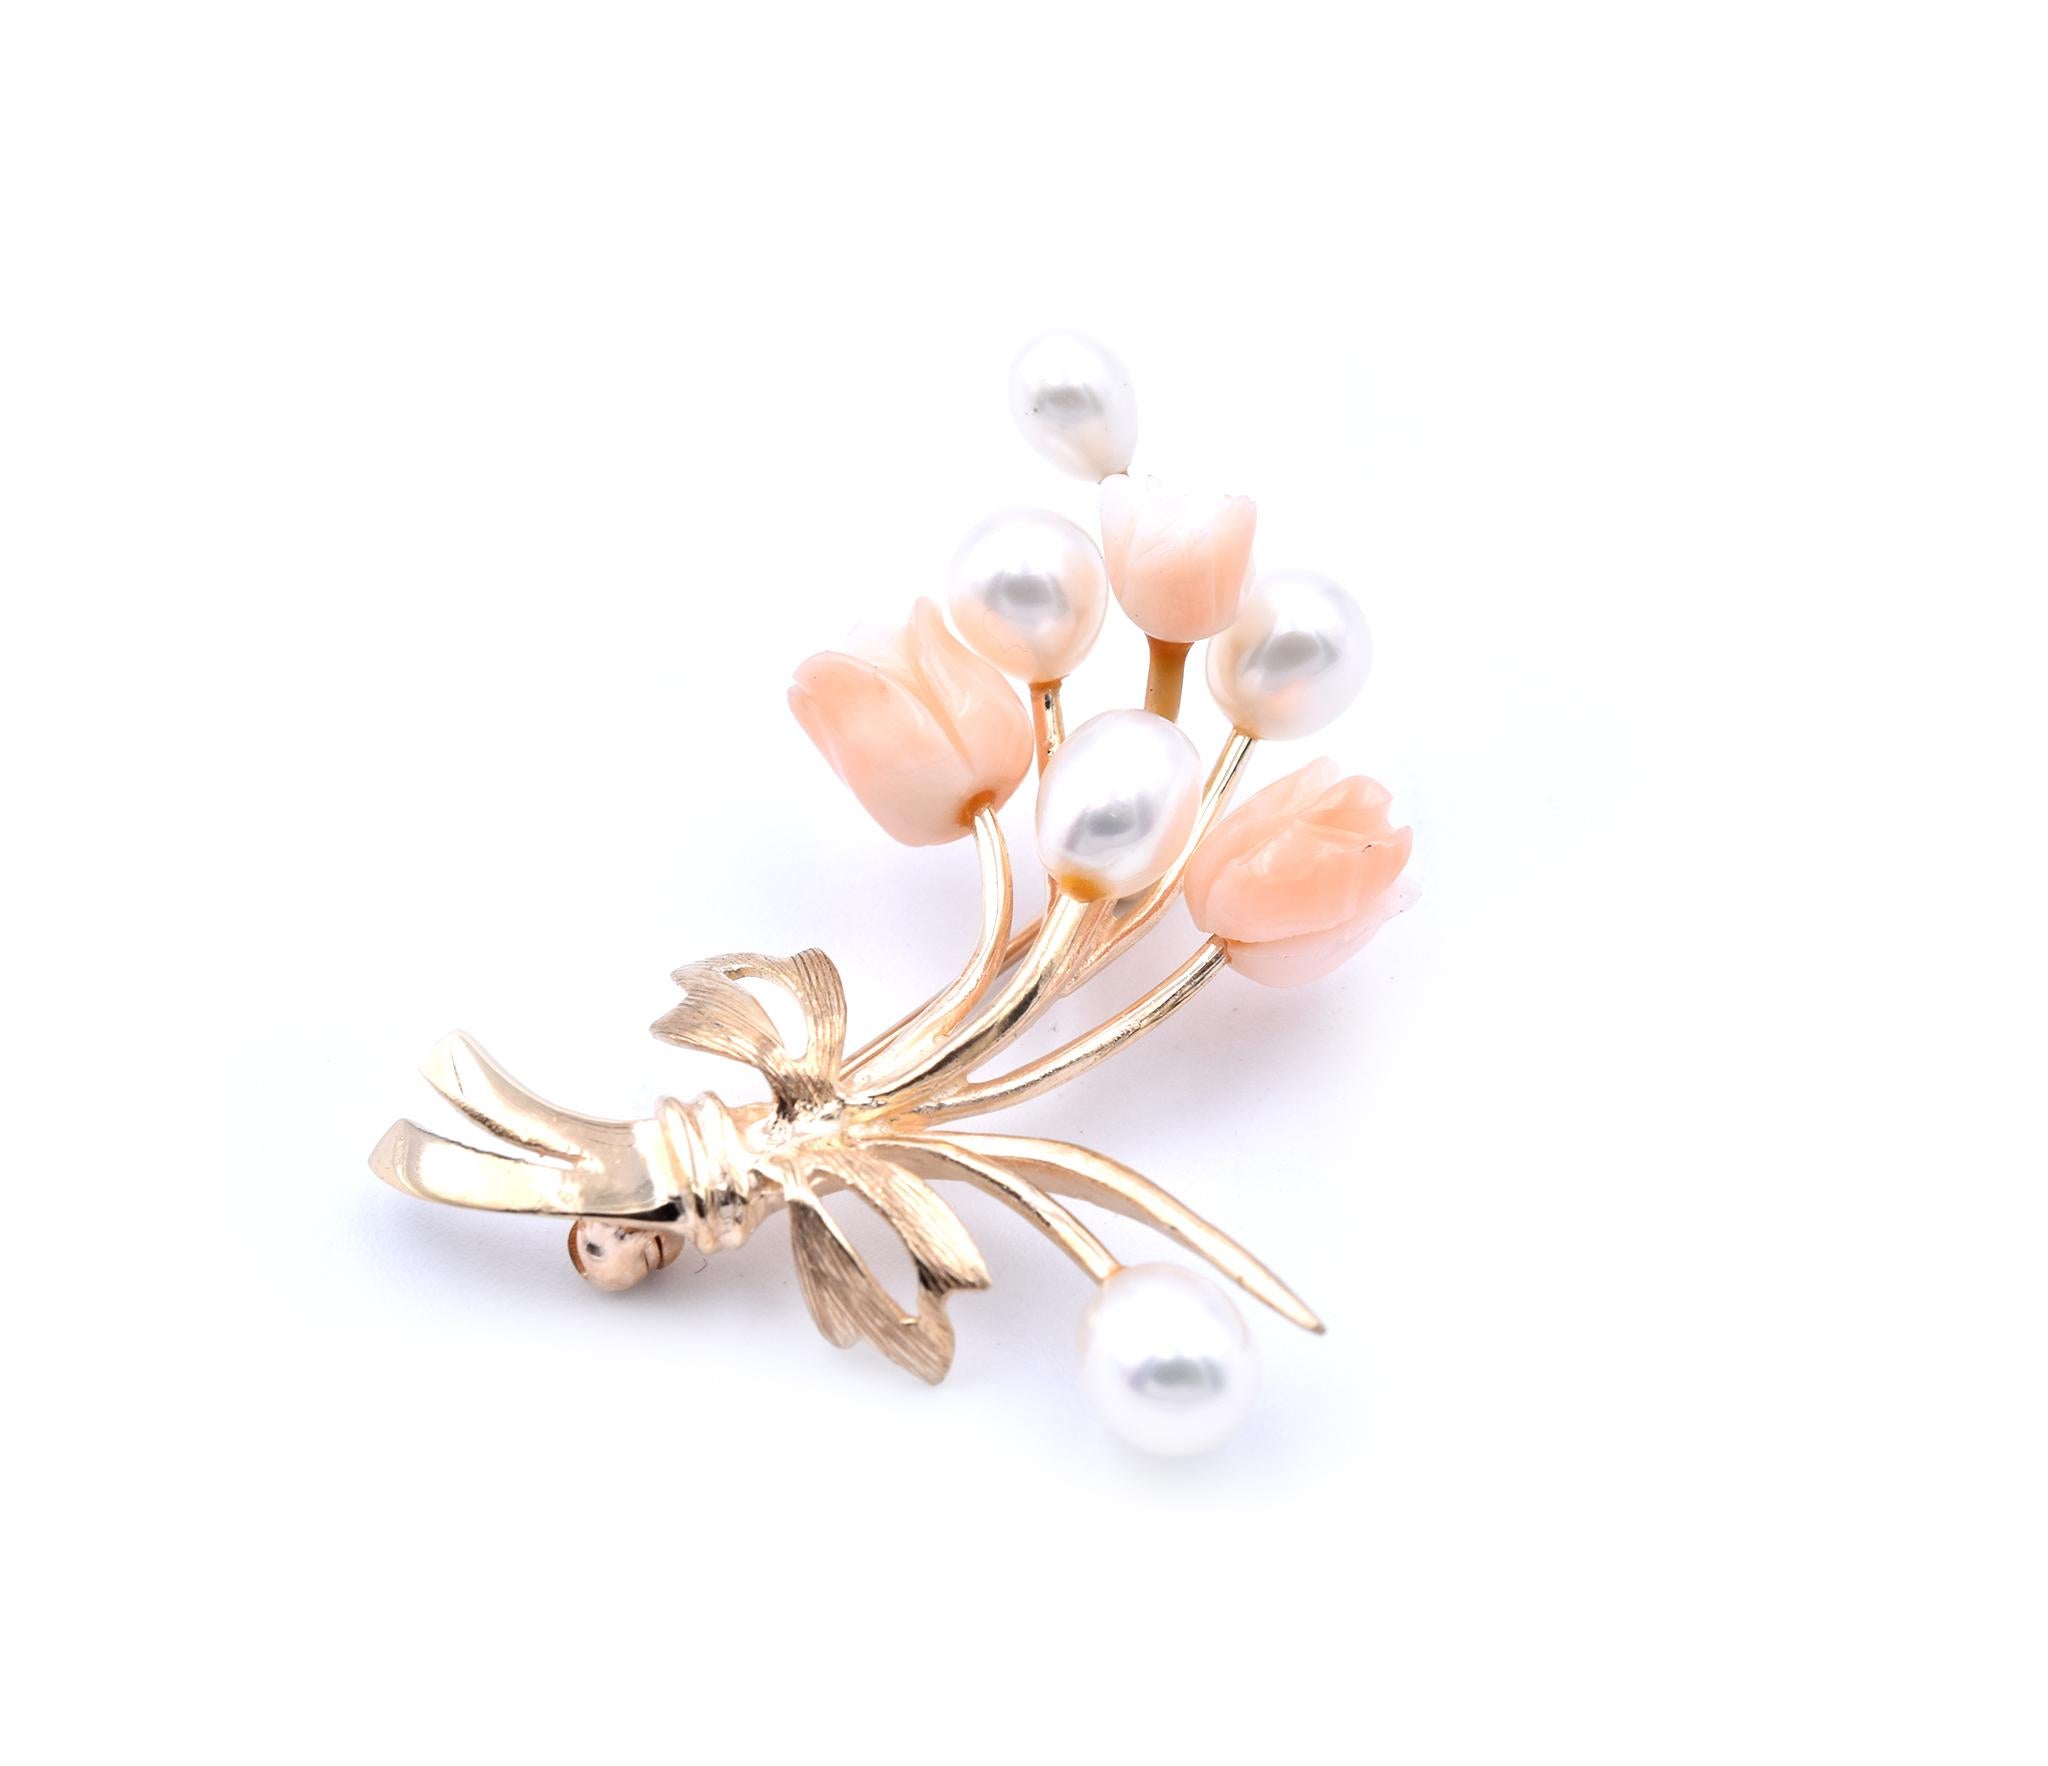 Designer: custom
Material: 14k yellow gold
Dimensions: pin is approximately 36mm long
Weight: 5.44 grams
